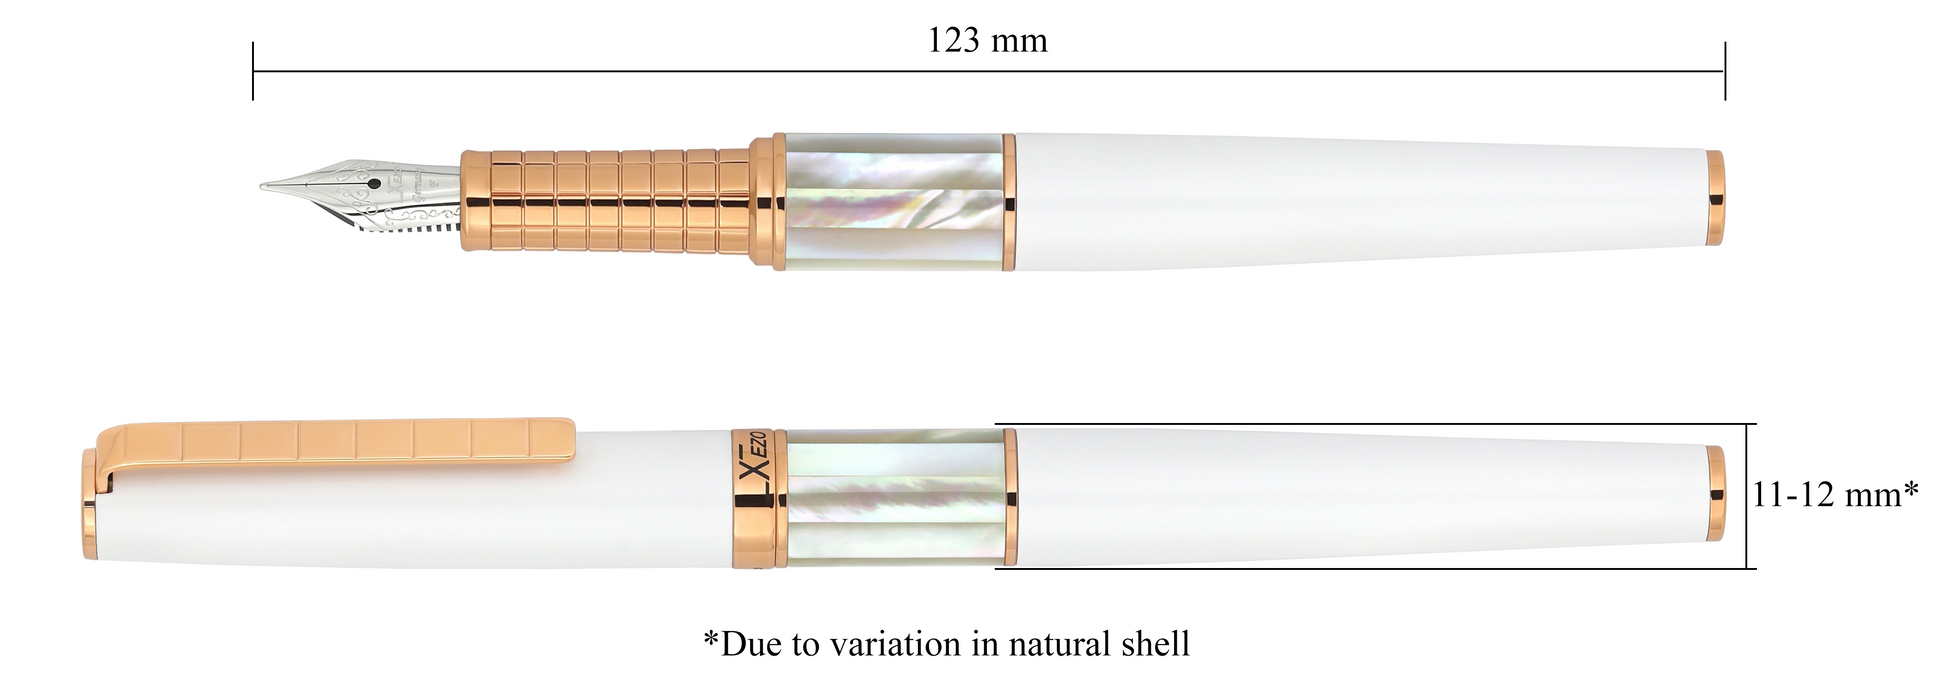 Xezo - Vertical view of two Speed Master White F-WRG Fountain pens; the one on the left is capped, and the one on the right is uncapped; Length is labeled 123 mm, width is labeled 11-12mm (Due to variation in natural shell)